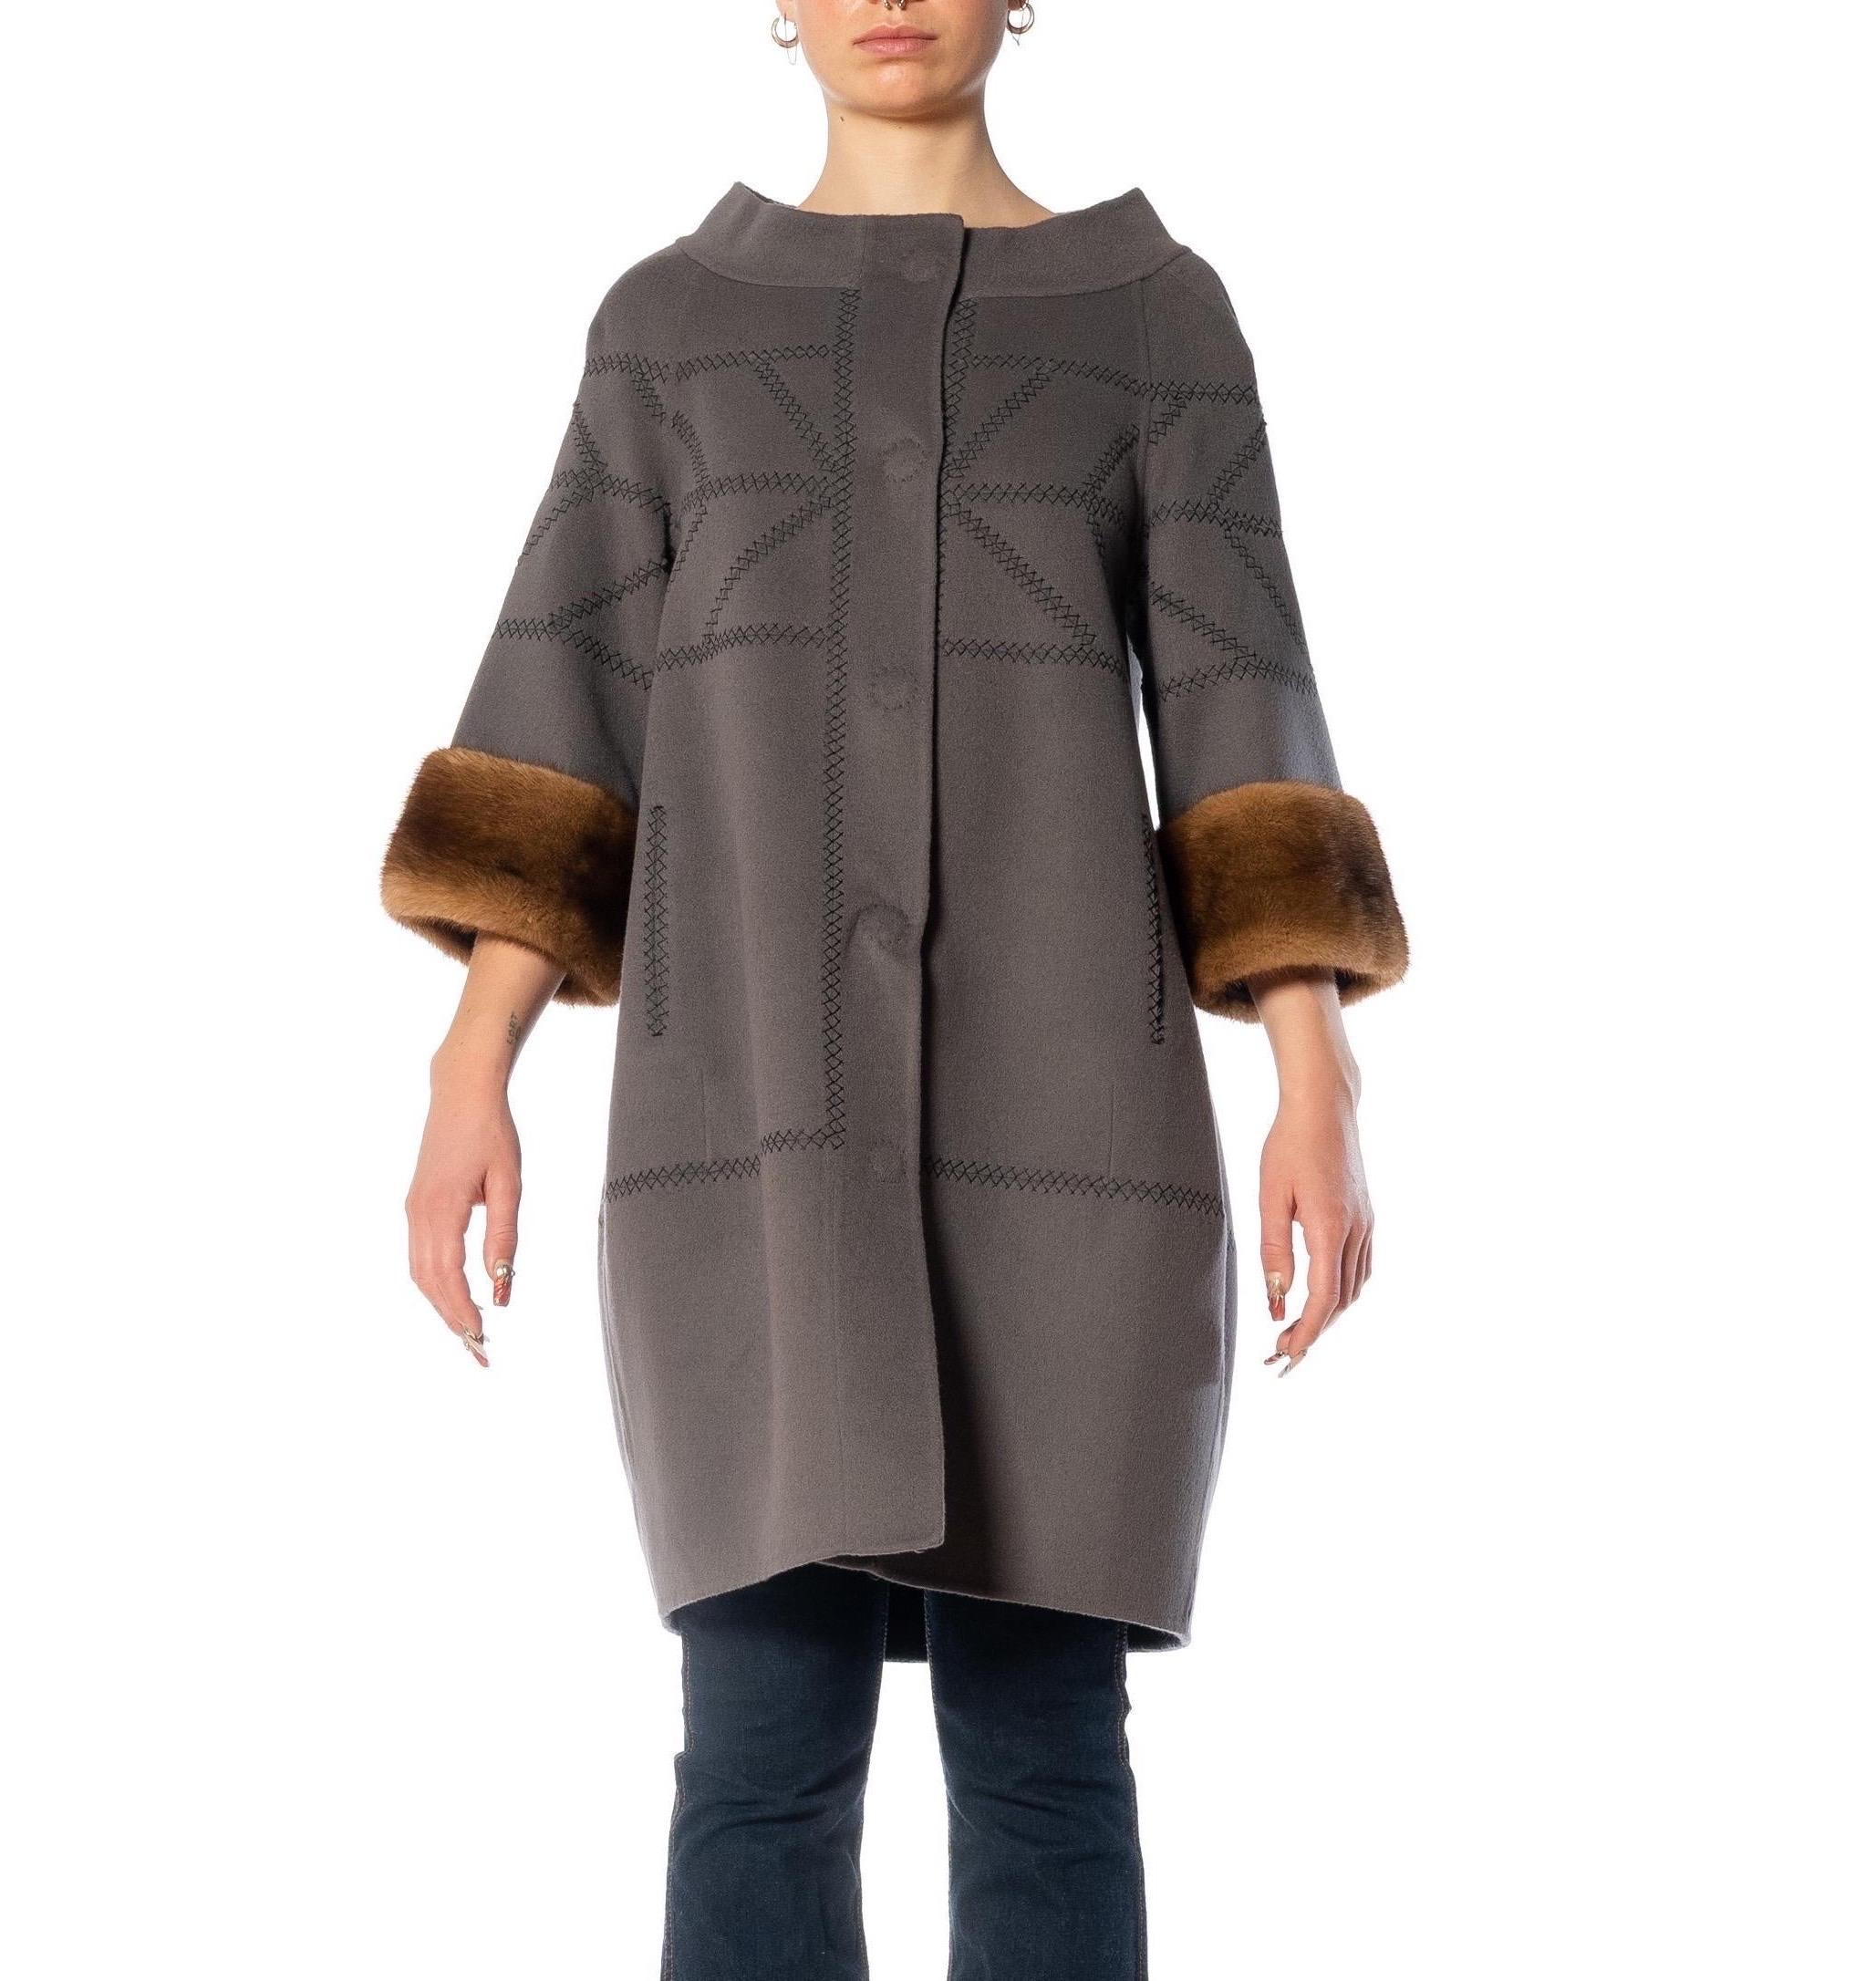 Women's 1990S J. MENDEL Gray Wool & Cashmere Silk Lined Coat With Fur Cuffs For Sale